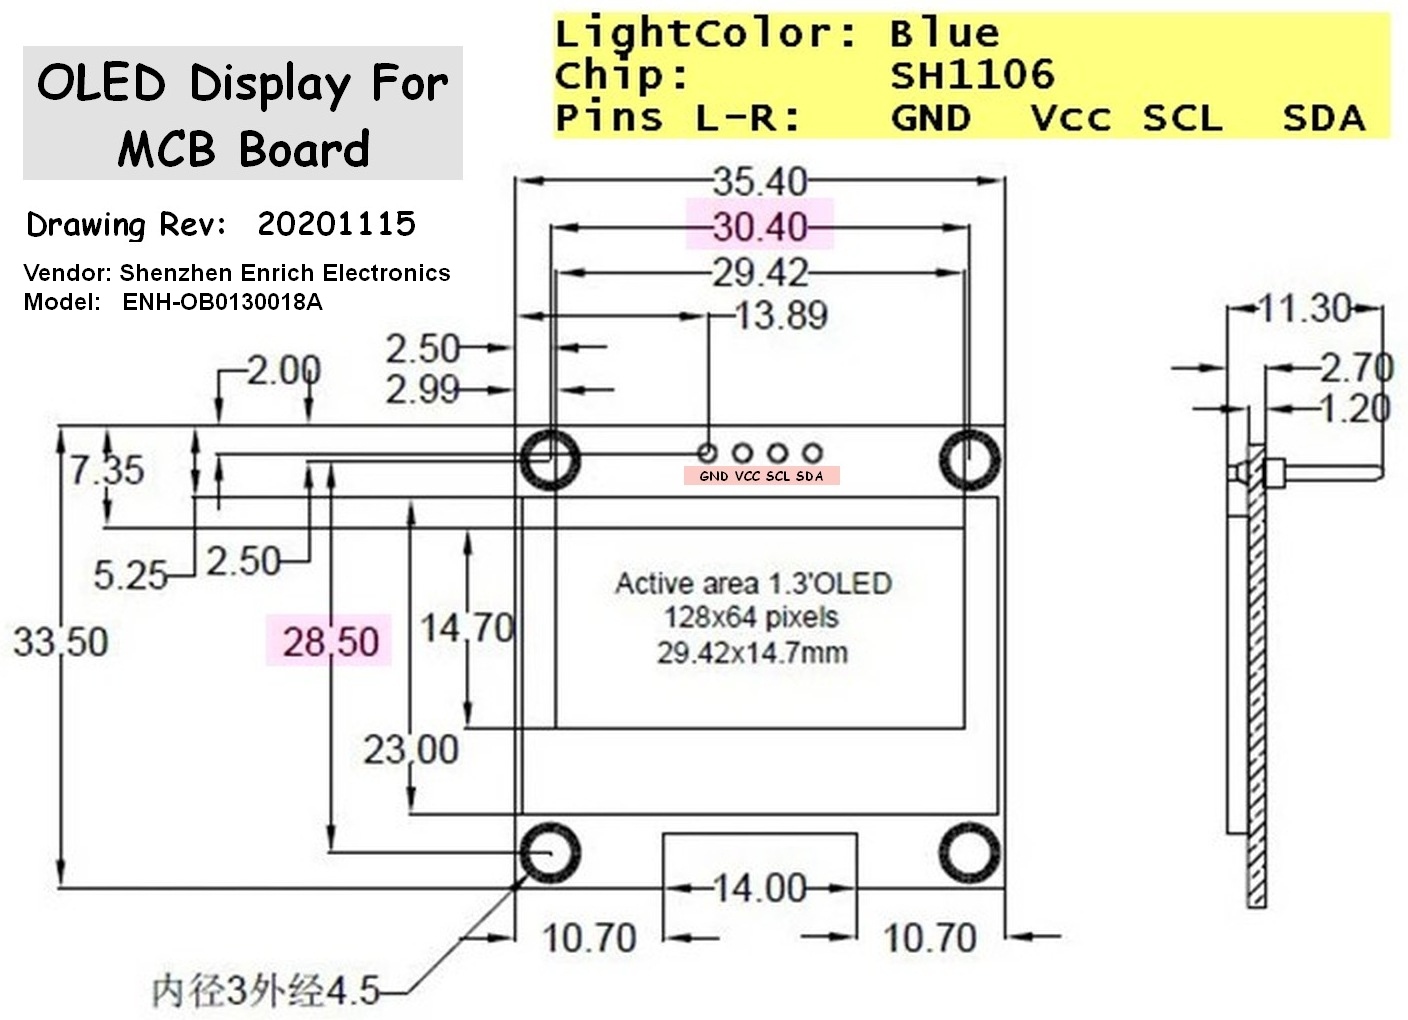 OLED Display For MCB